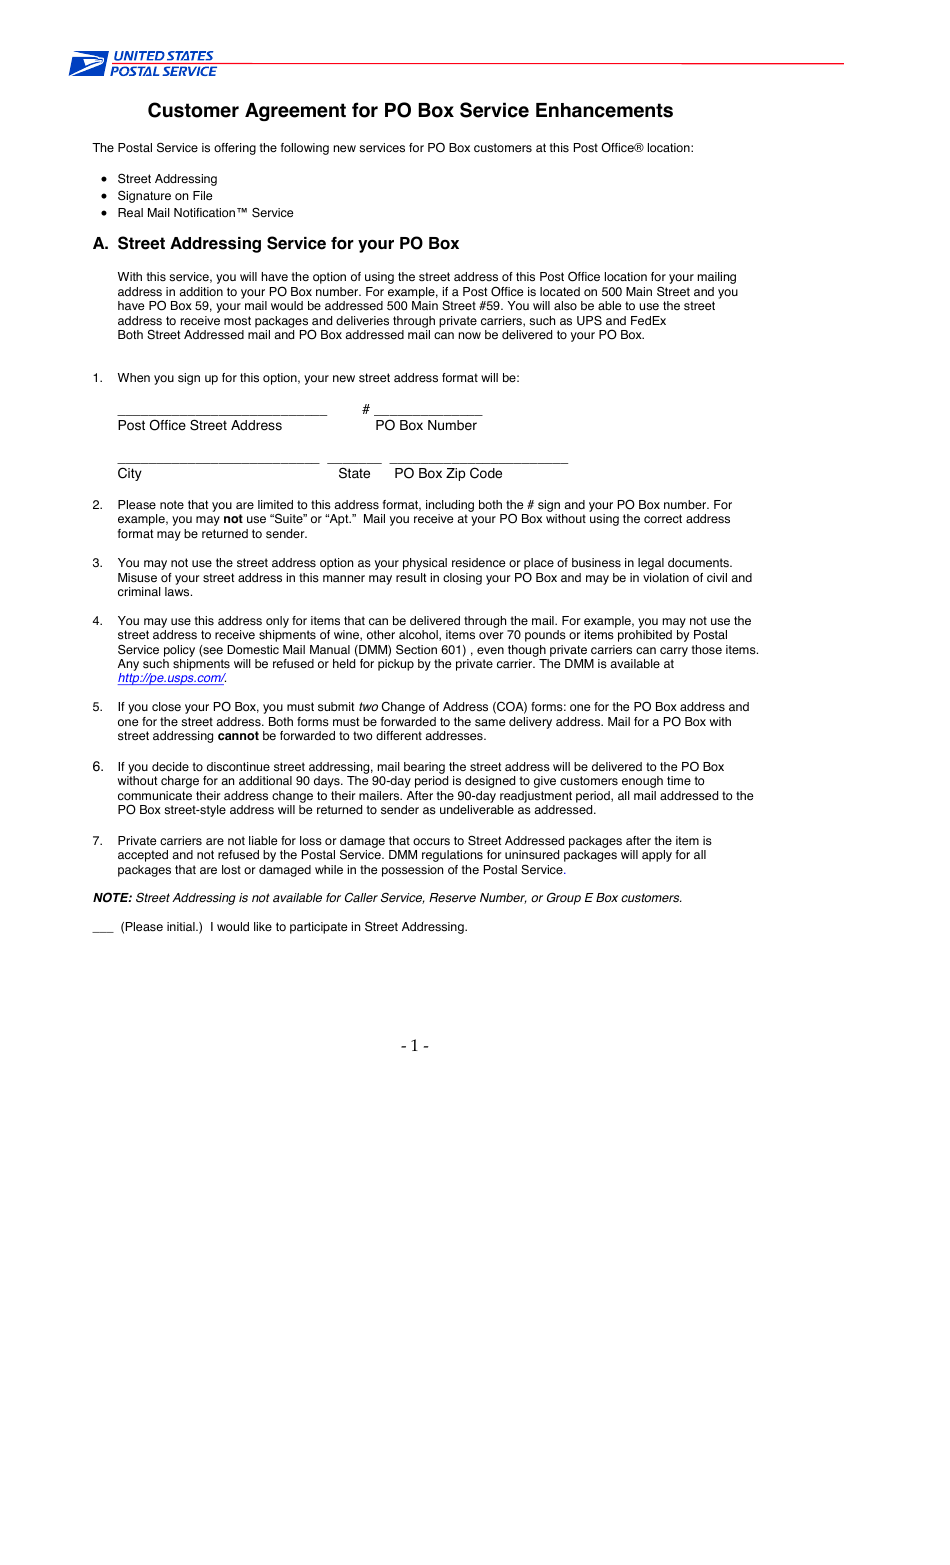 Customer Agreement for Po Box Services Enhancements, Page 1